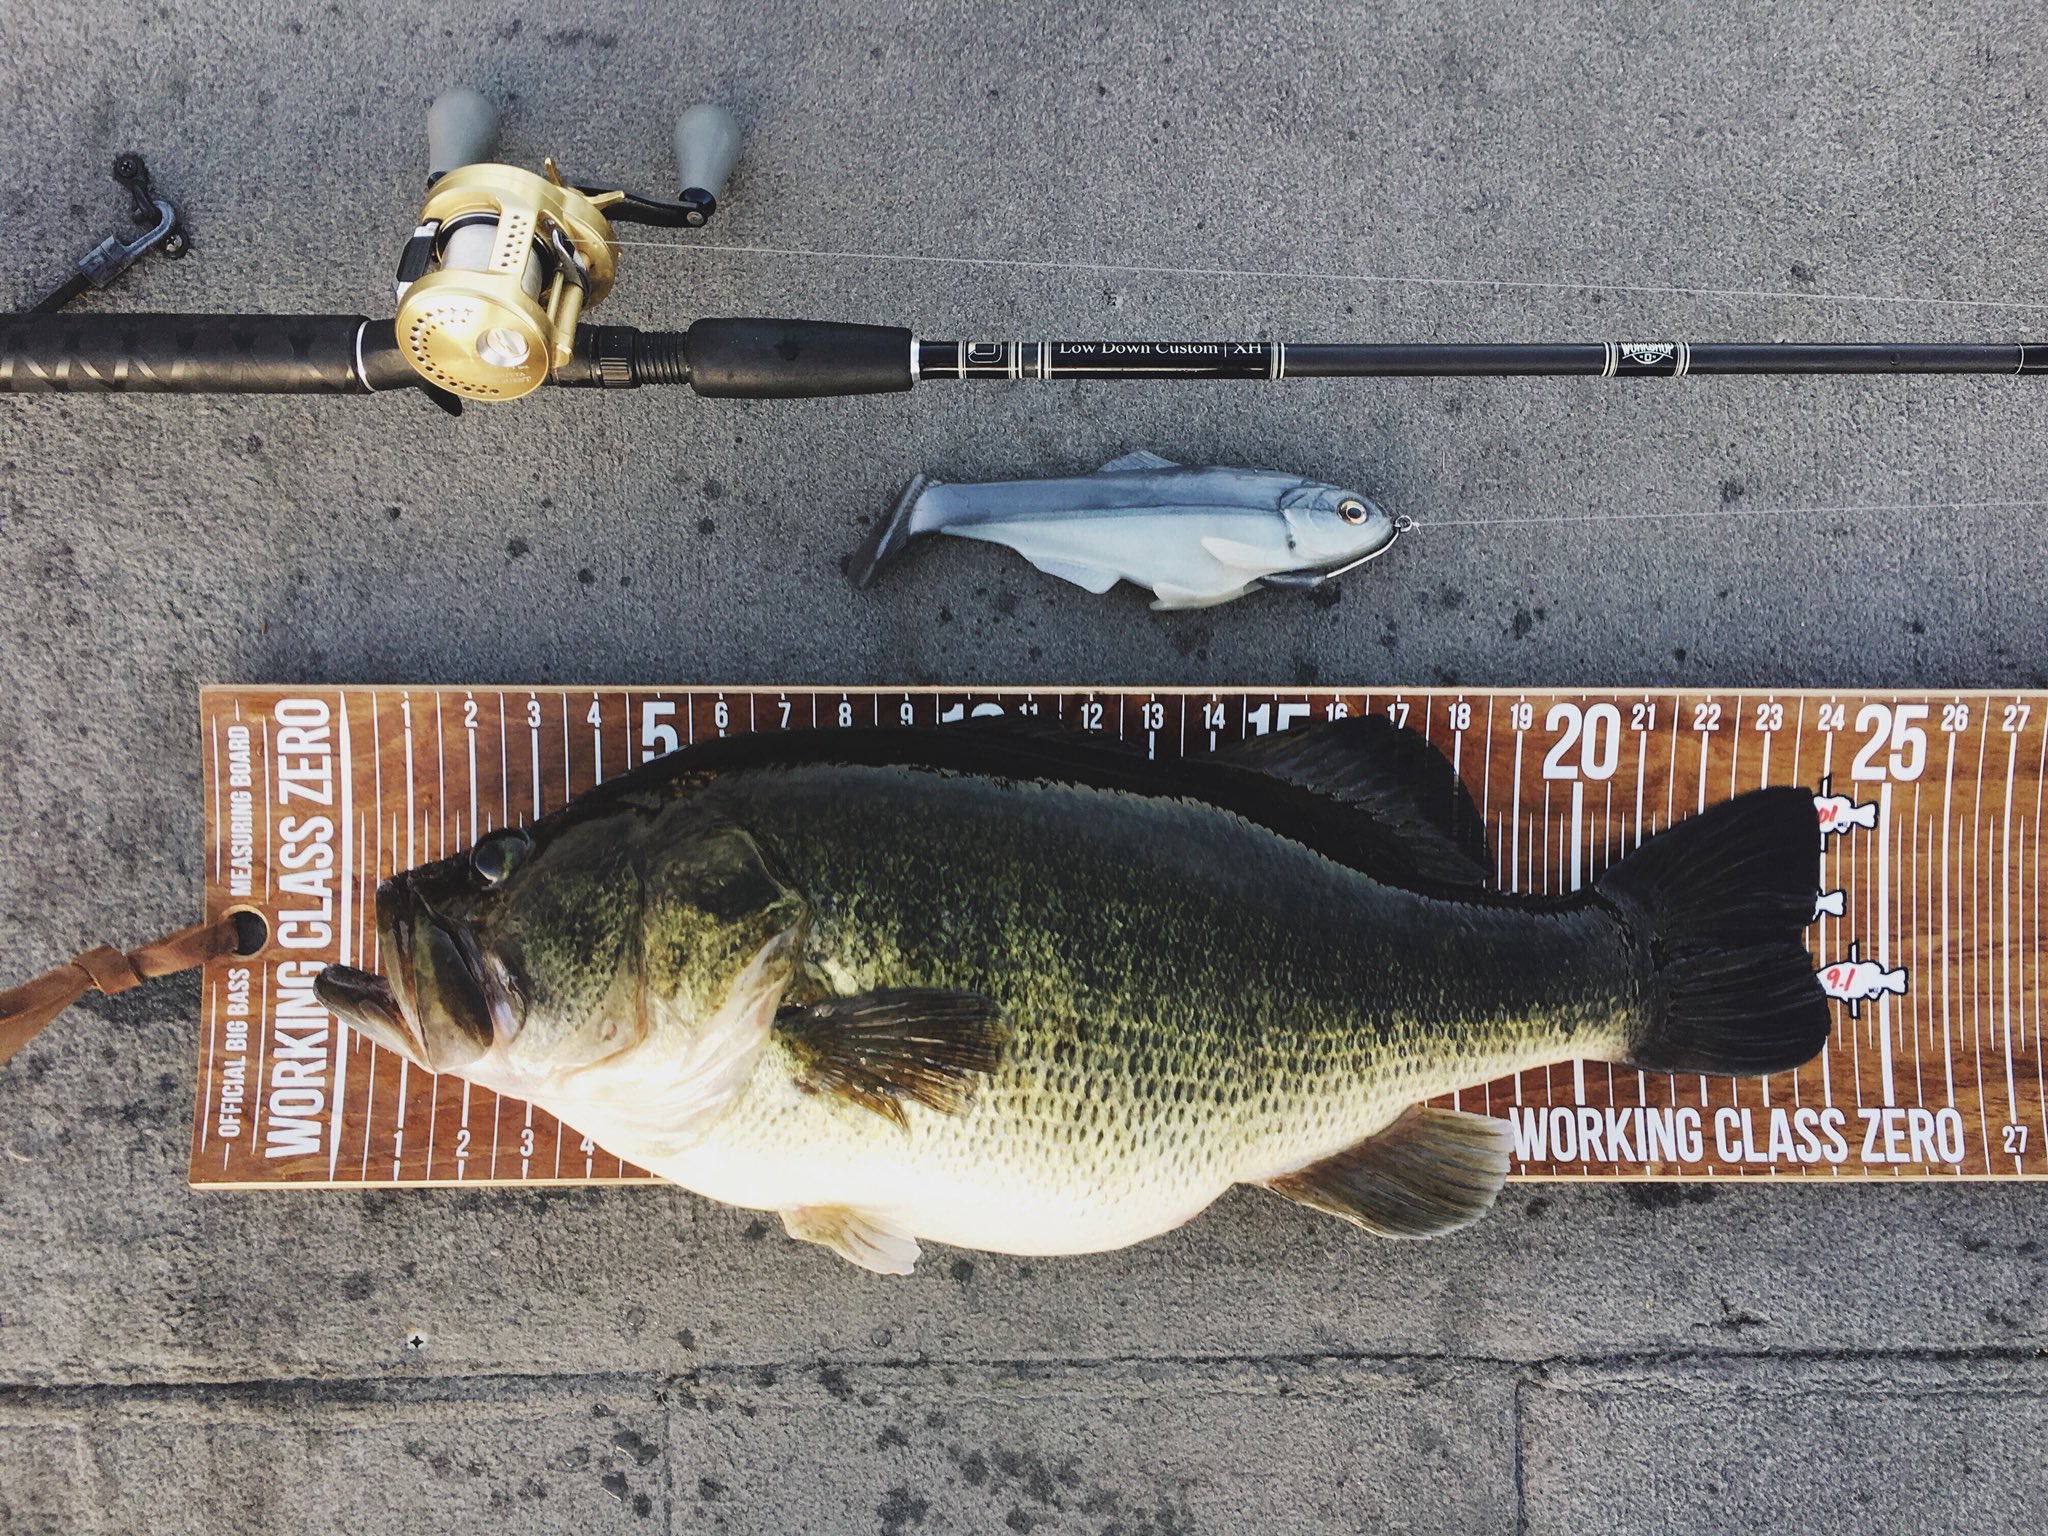 Low Down Customs on X: Last cast. First bass. (@gilbertmike_WCZ) lays down  another double digit on the Working Class Zero Big Bass Board. Swipe left  to see the specs. (setup: Shimano x